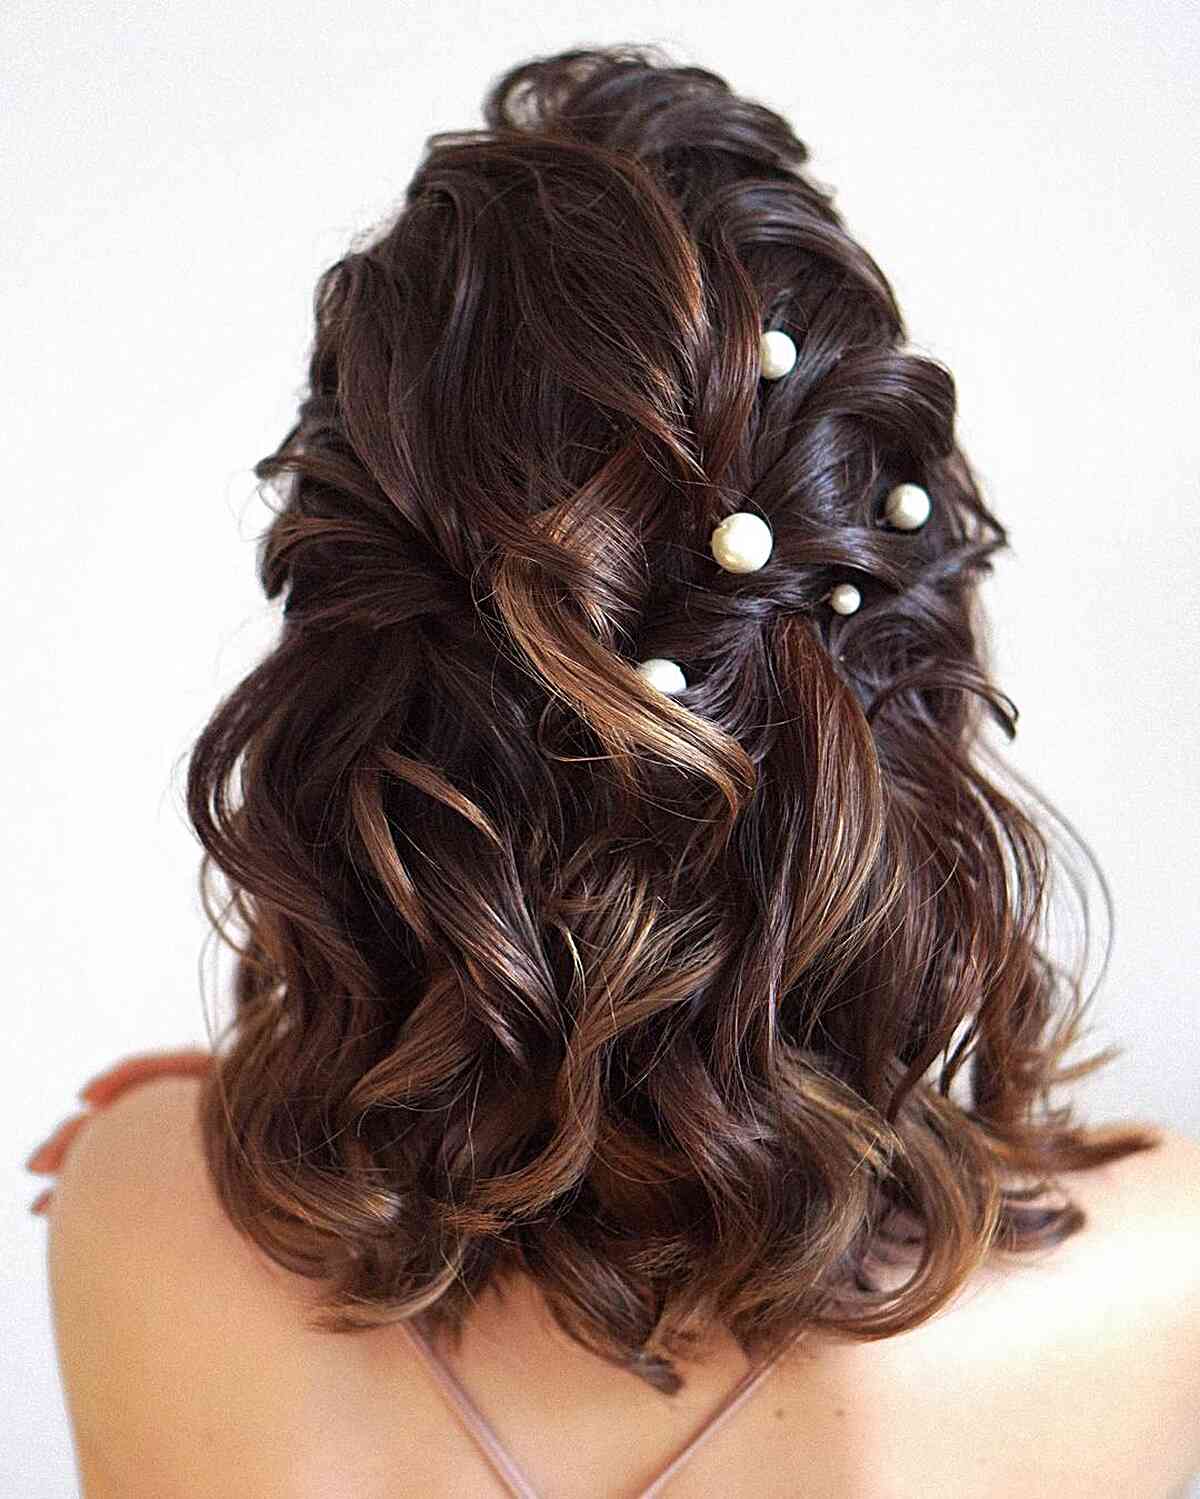 Pinned for a perfect party shoulder length hair